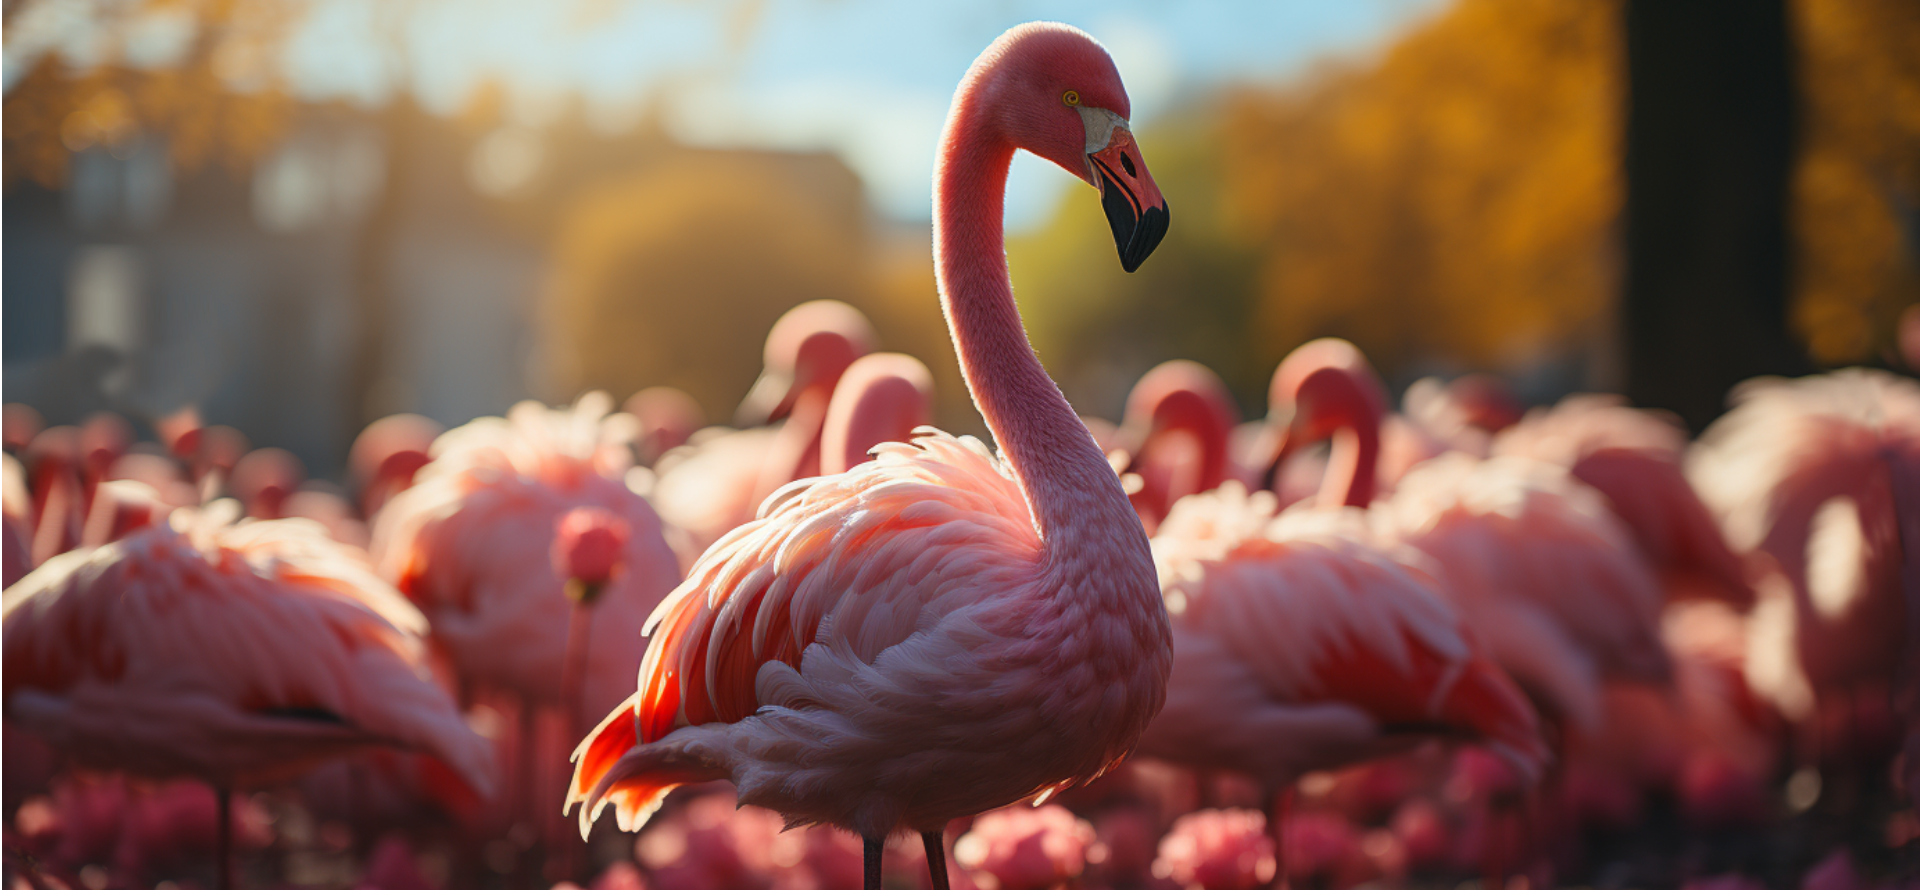 Group of Flamingos standing together